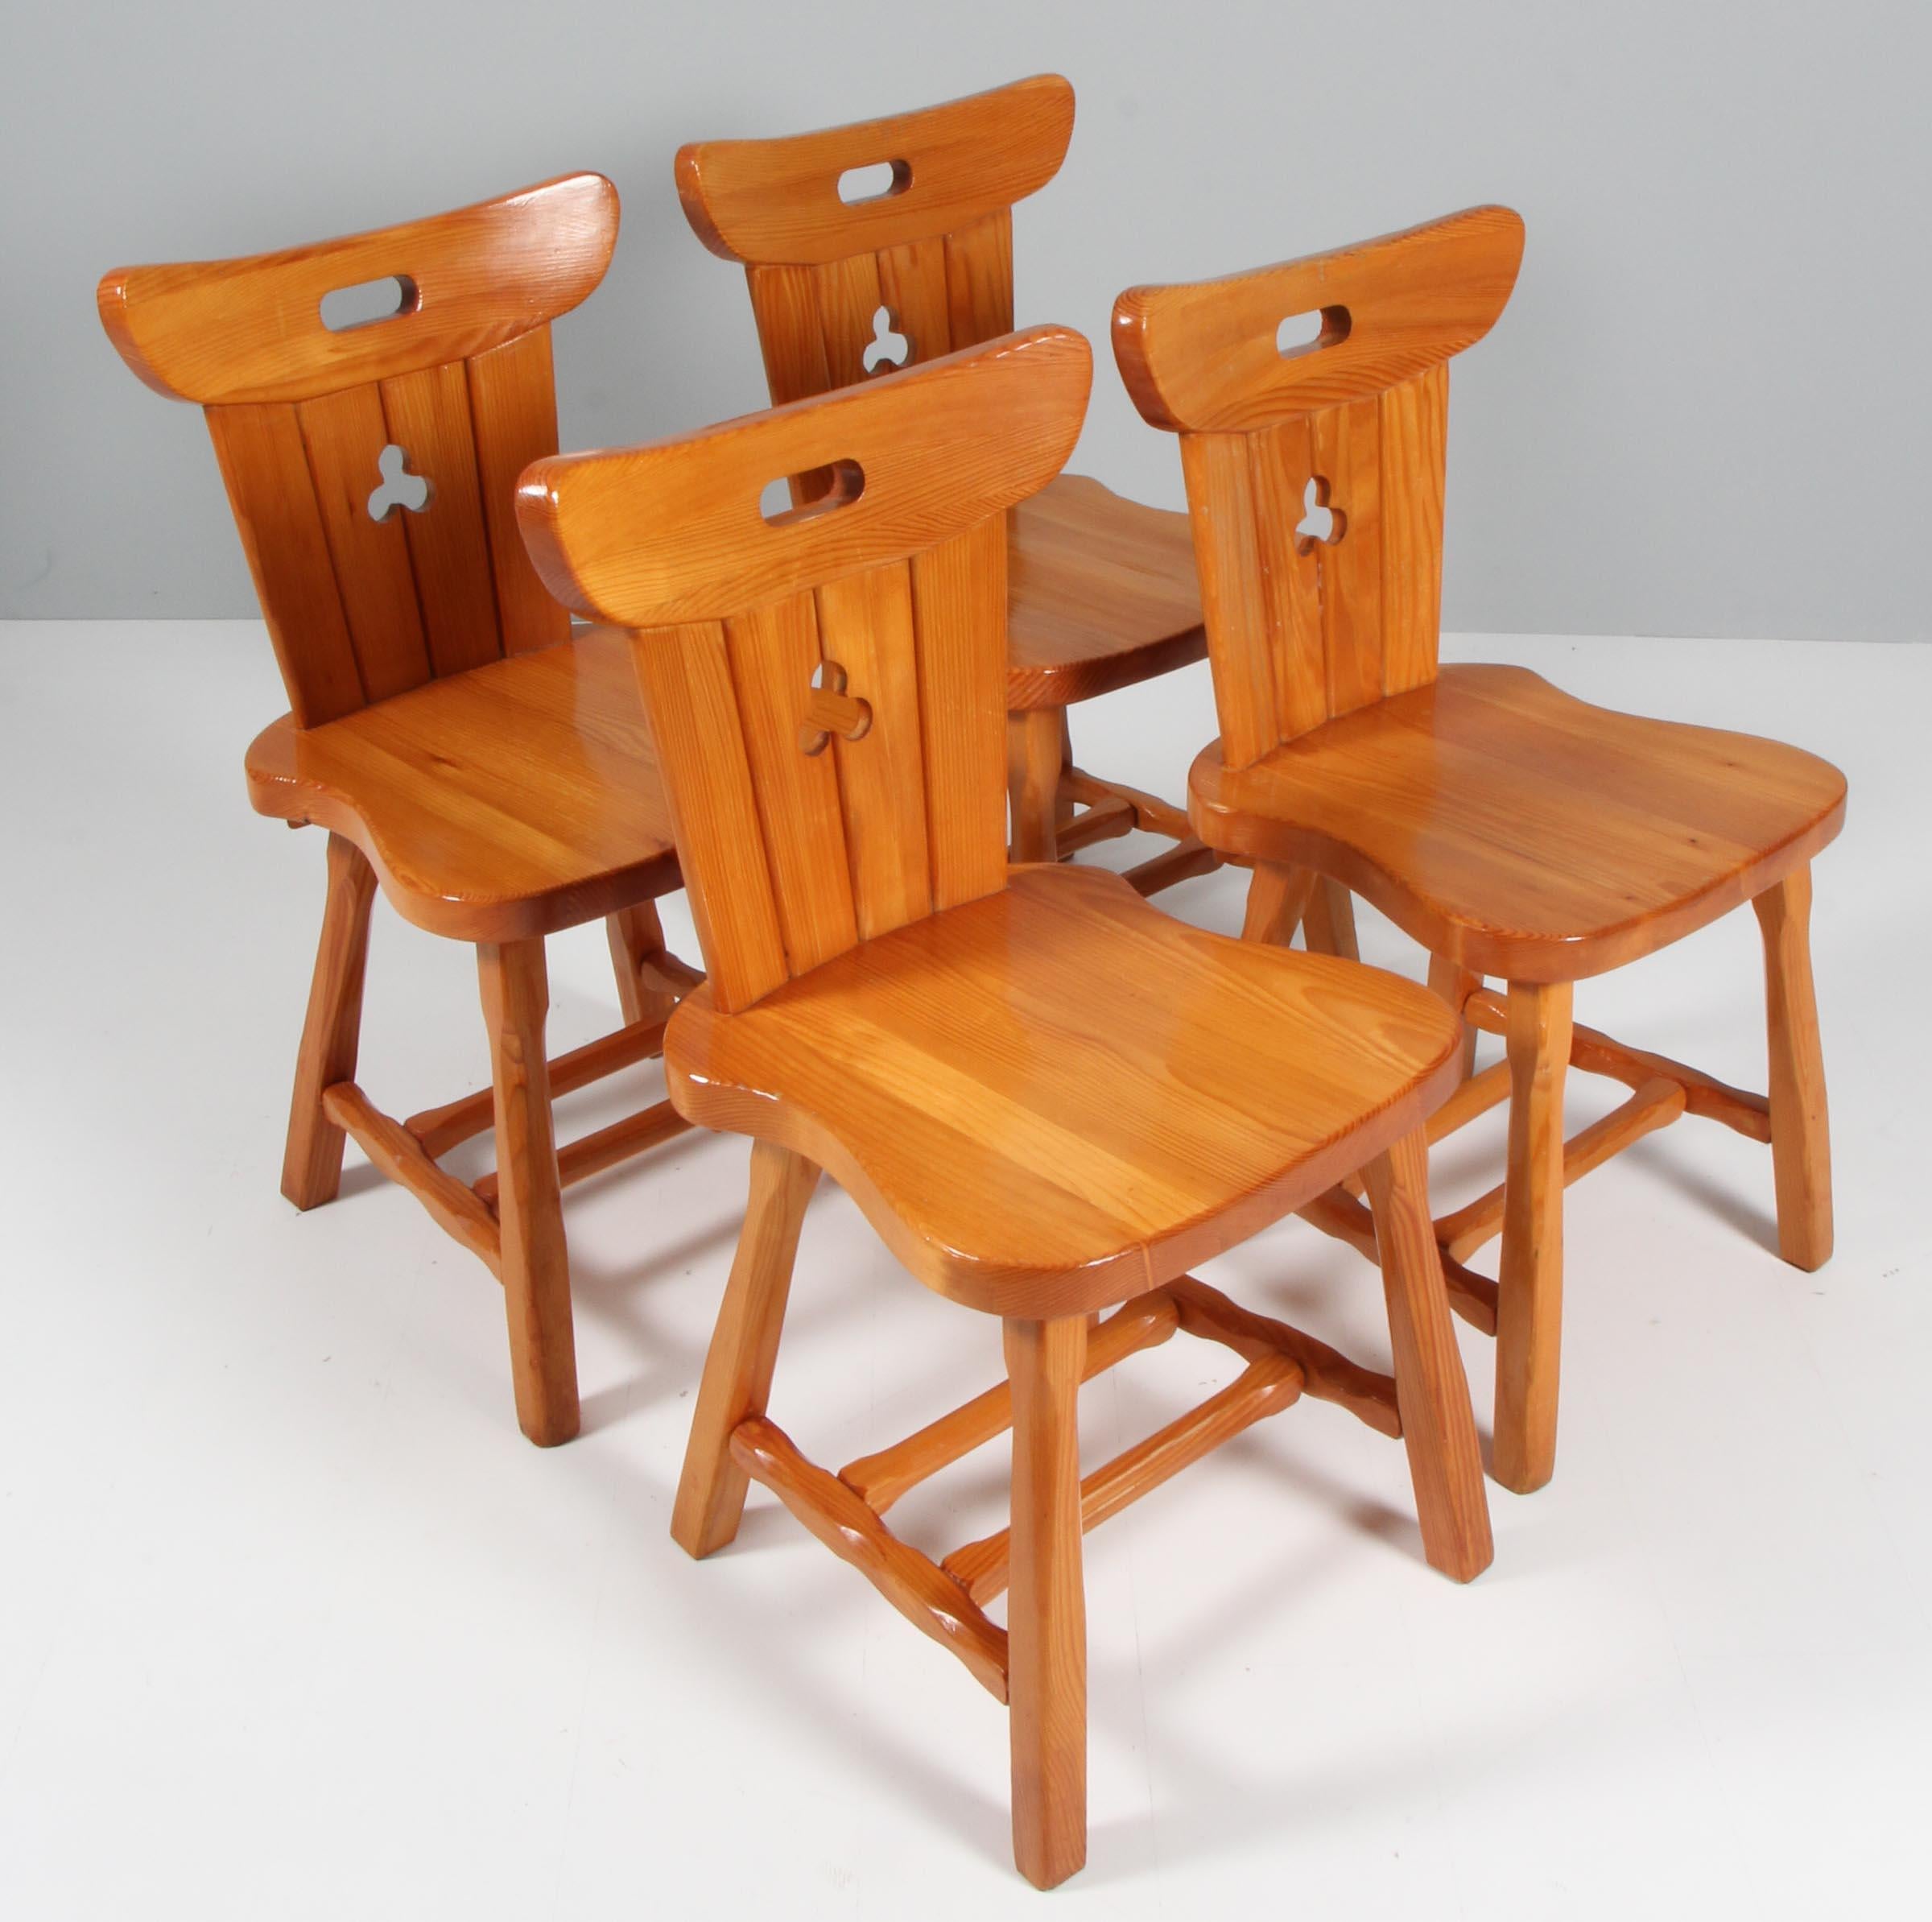 Swedish cabinetmaker set of four cabin chairs in solid pine.

Made in the 1970s.